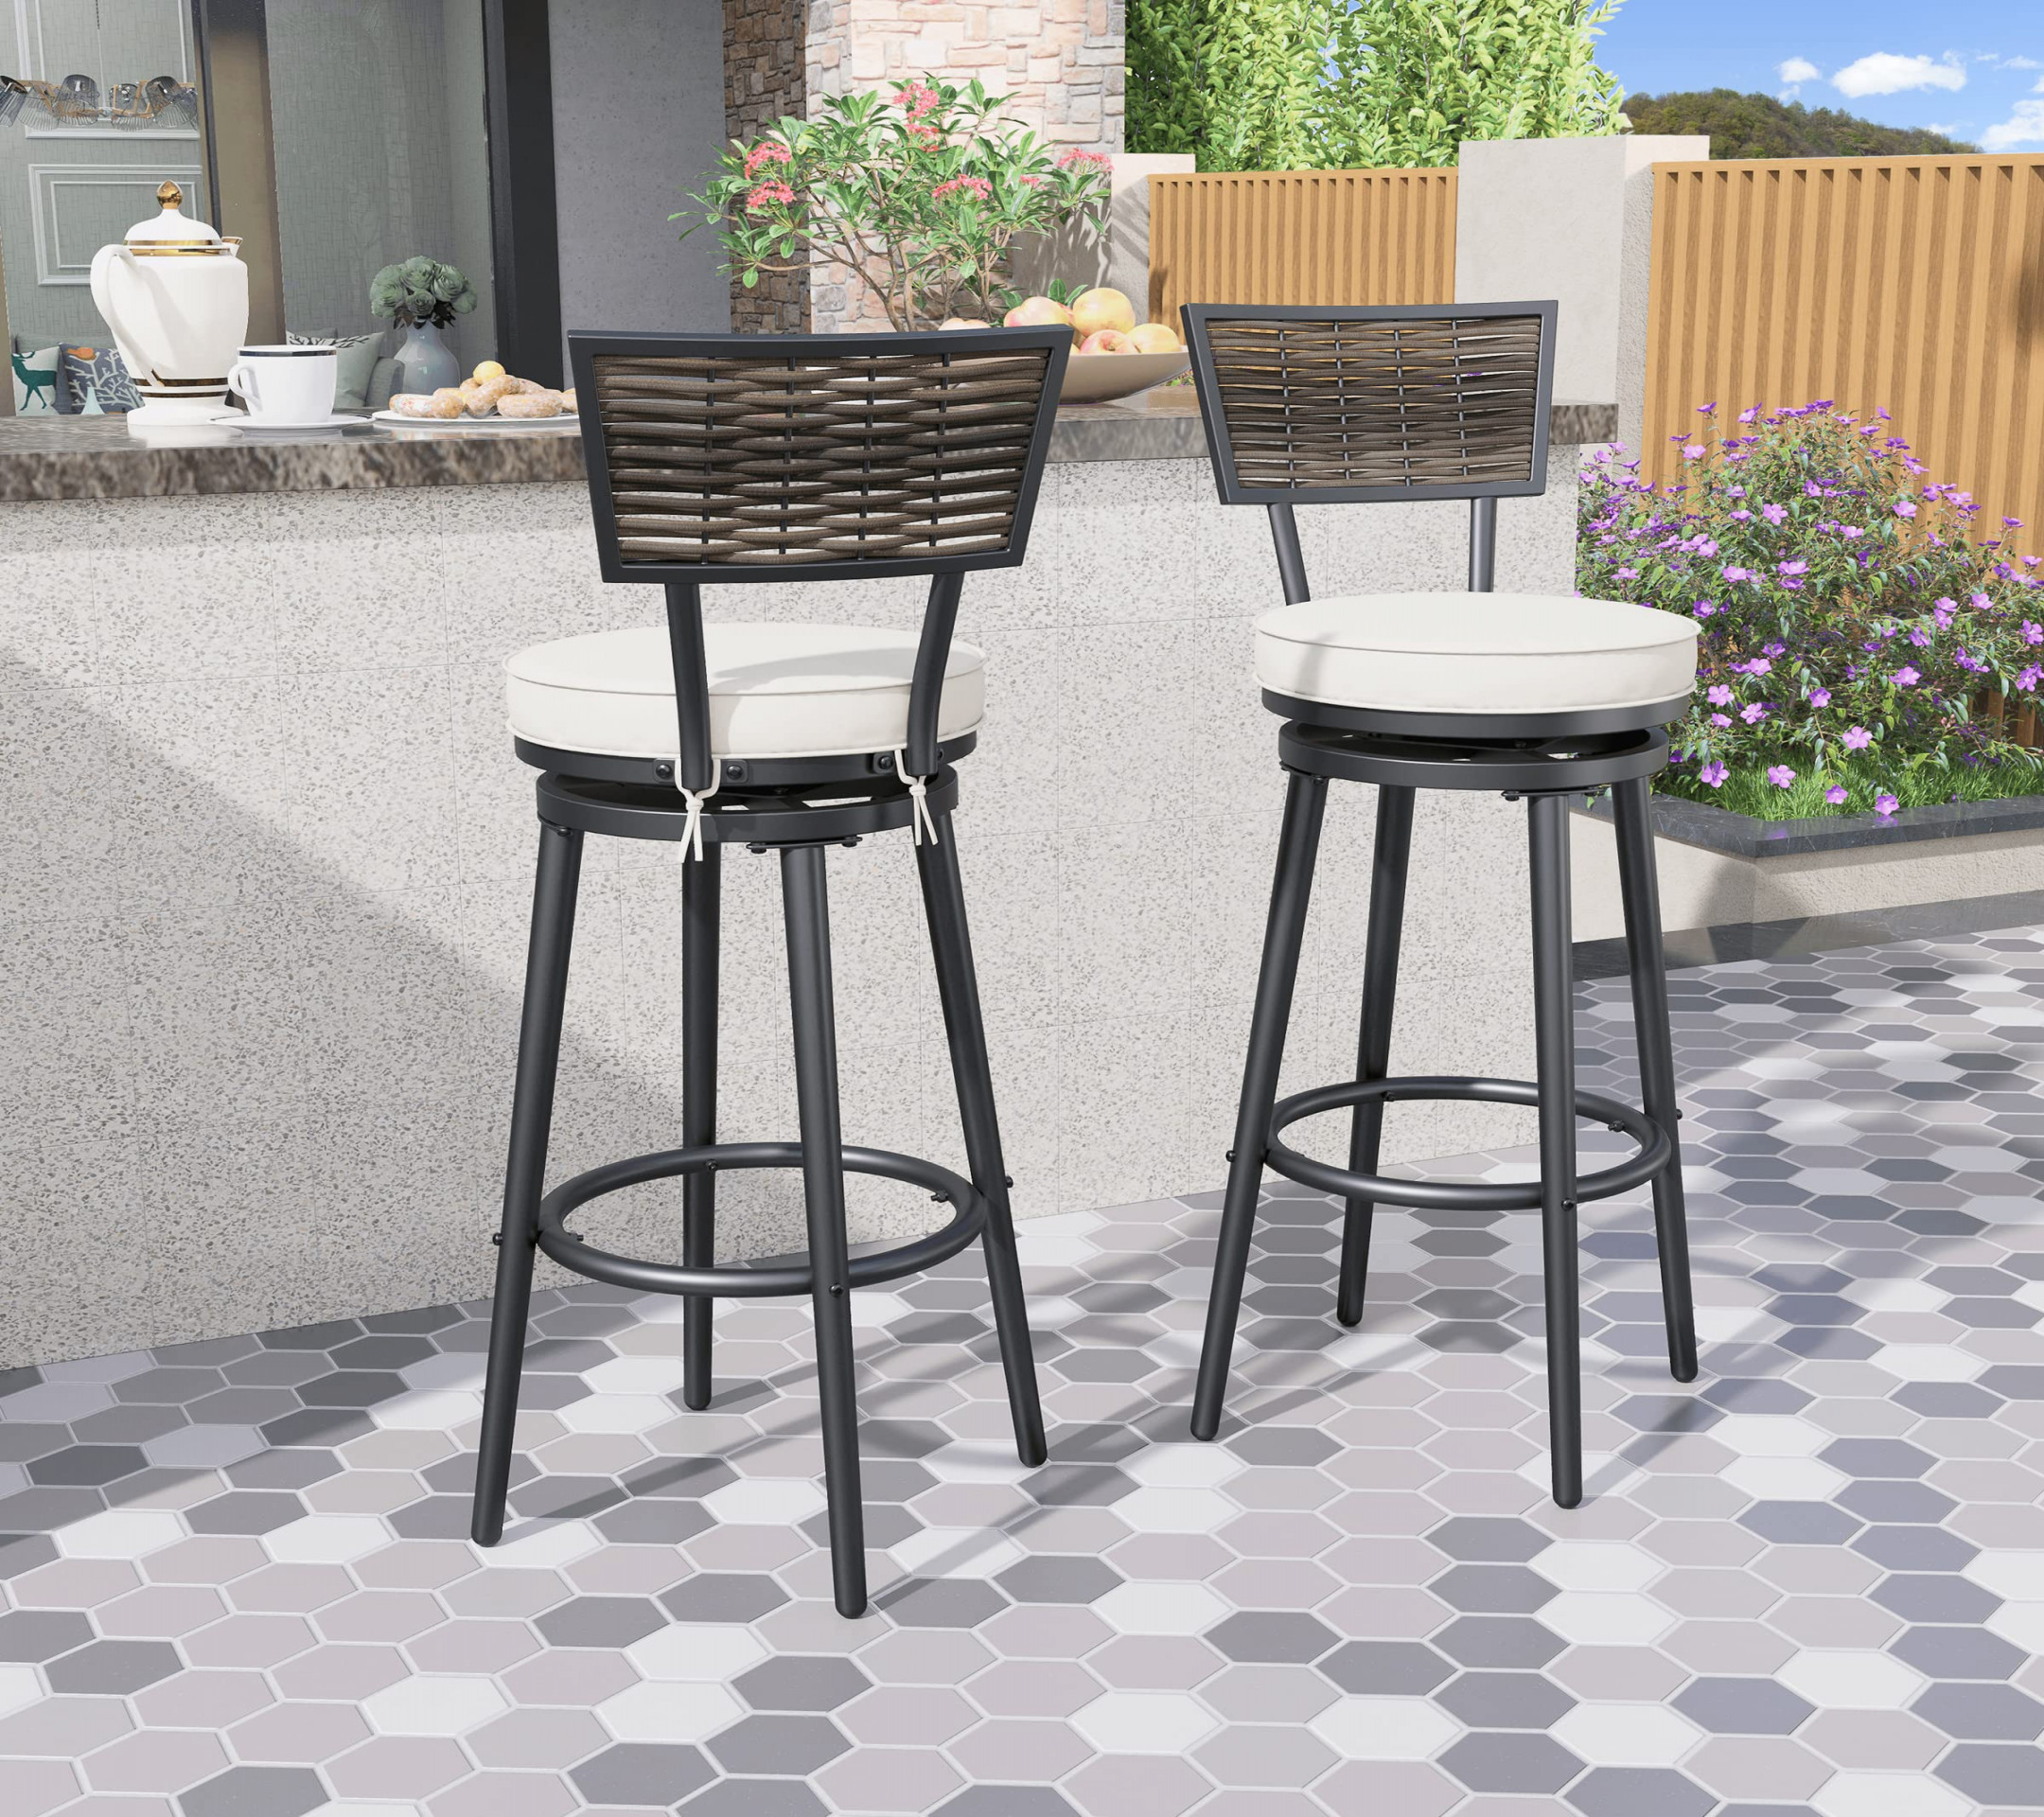 TOP HOME SPACE Patio Swivel Bar Stools Set of , Outdoor Bar Height Chairs  Metal All Weather Garden Furniture Armless Chair with Rattan Back for Deck